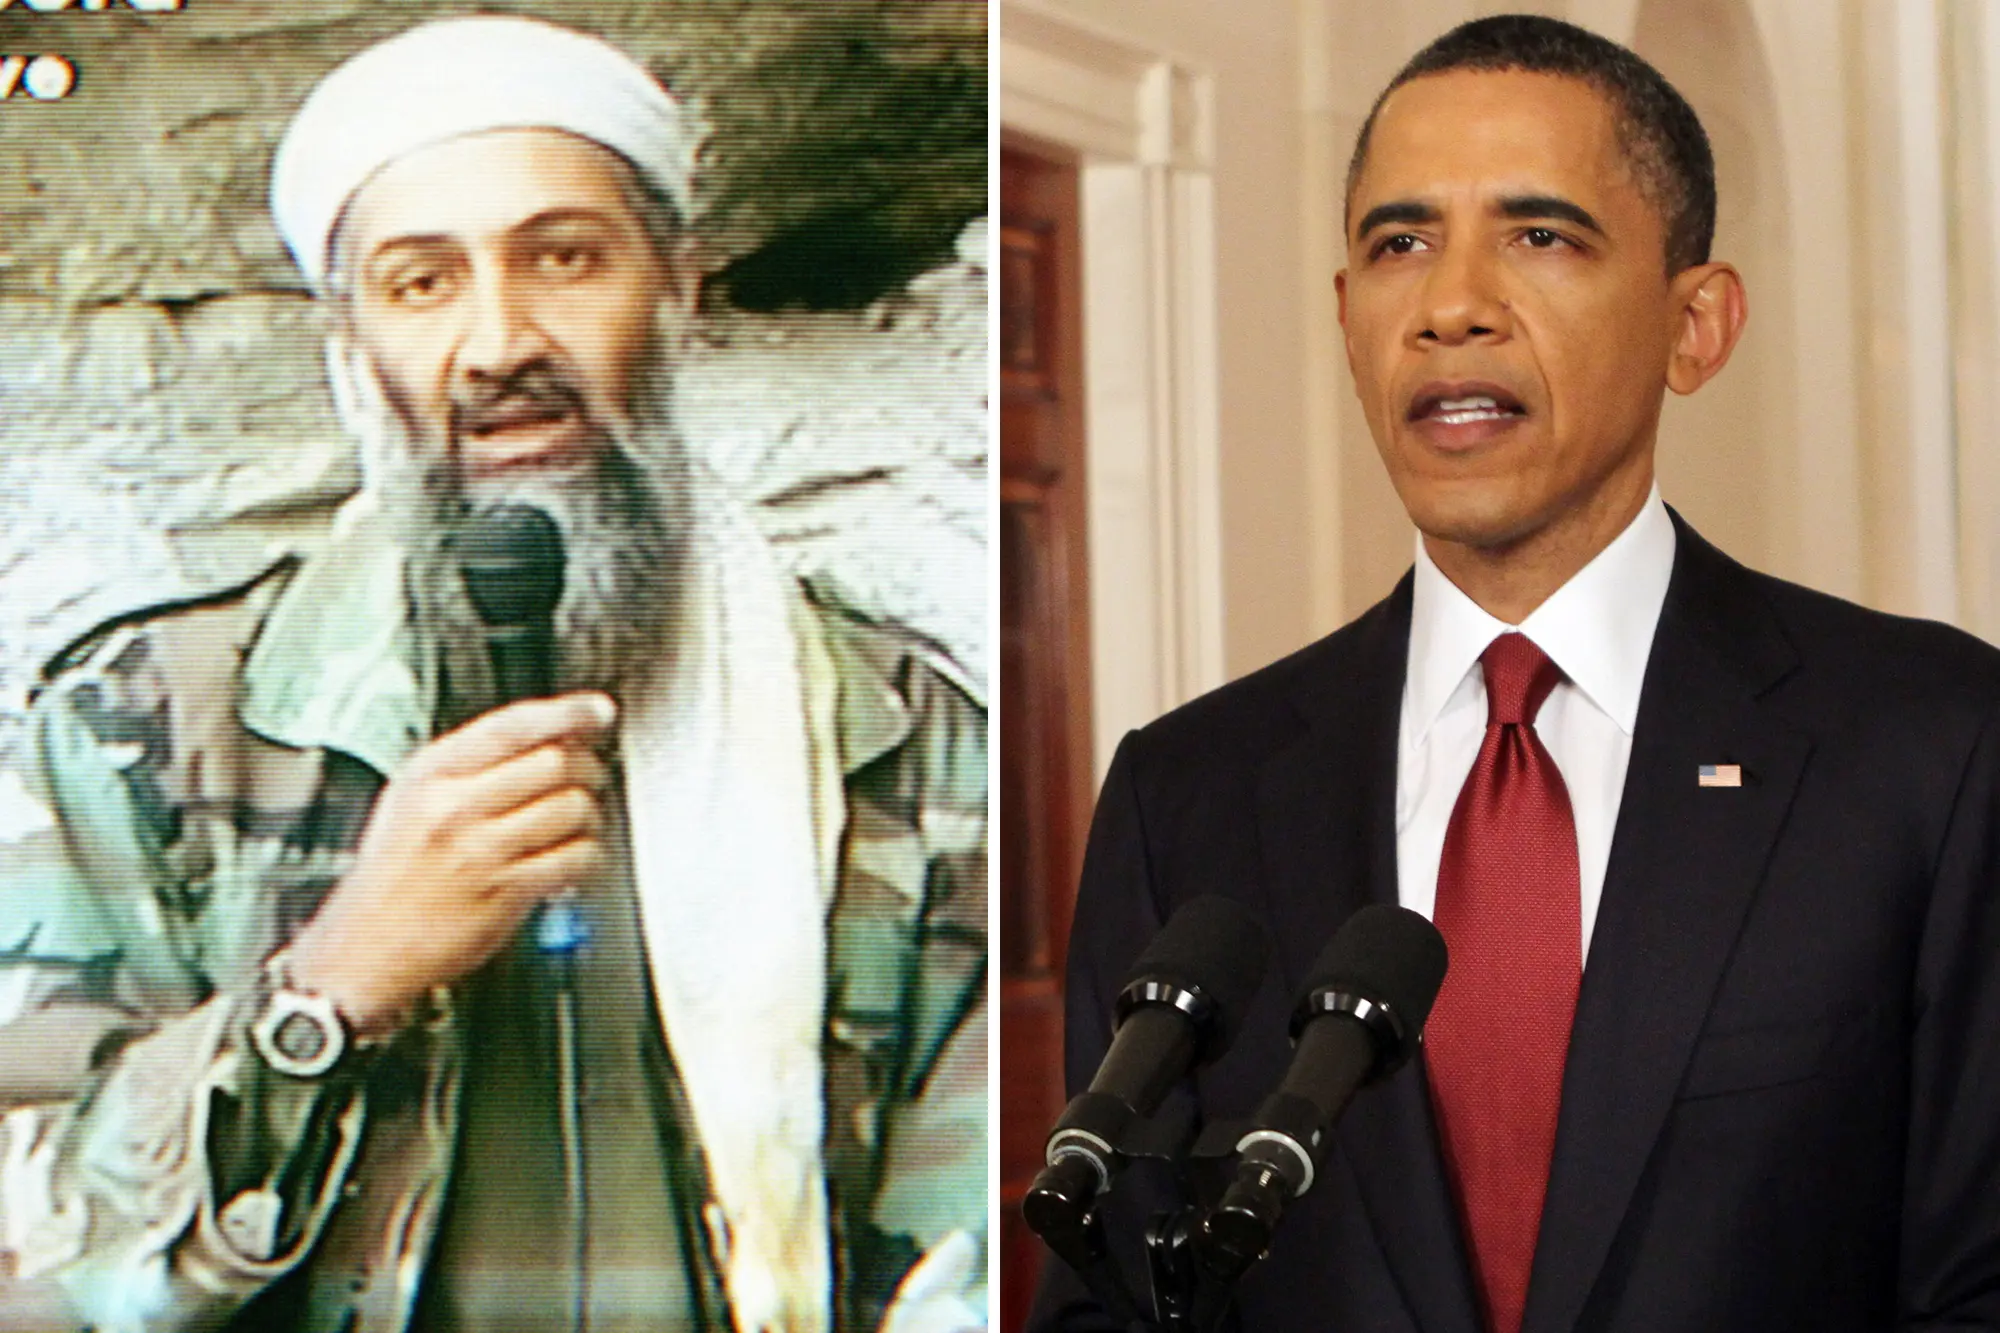 The hunt for bin Laden showcased the importance of international cooperation in the fight against terrorism.